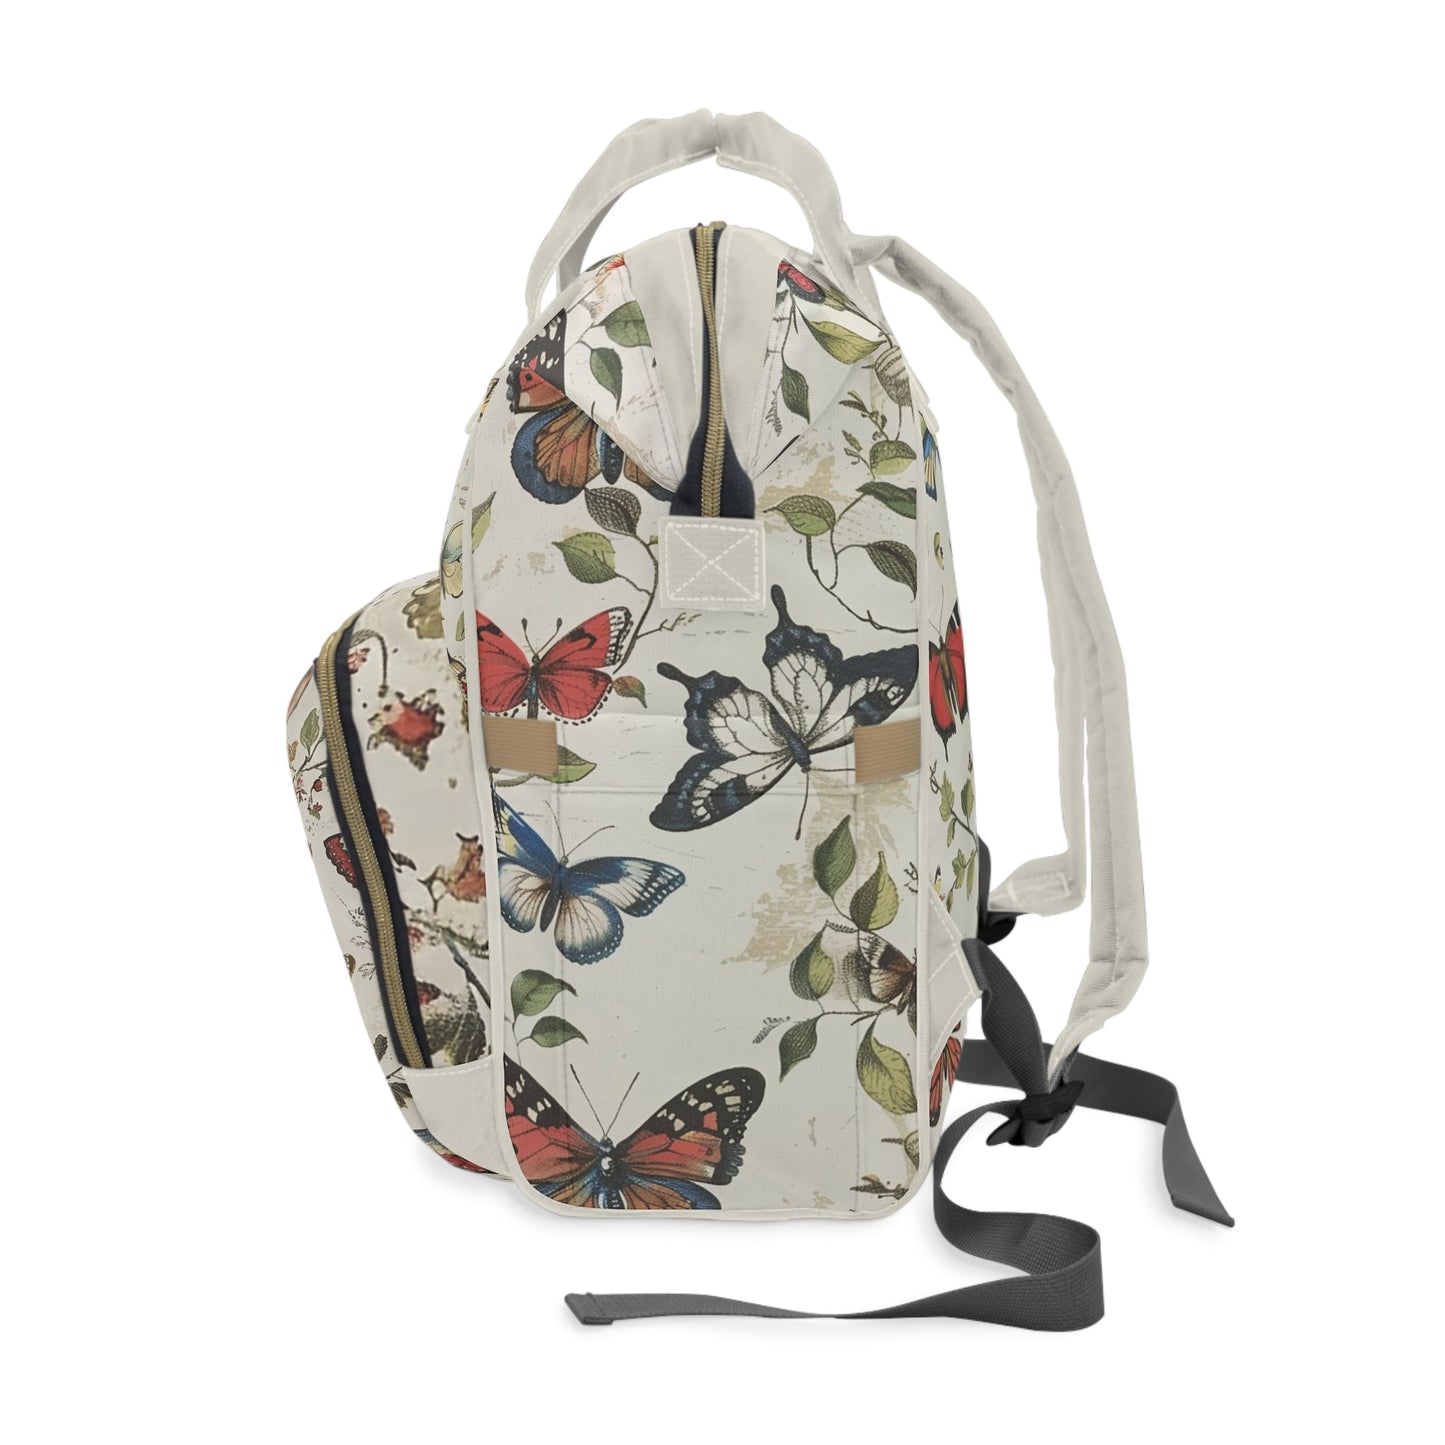 Butterfly Diaper Bag, Butterfly Print Diaper Bag Backpack, Ivory Background with Colorful Butterflys, Spring Garden Diaper Bag, Personalized Baby Shower Gift - FlooredByArt